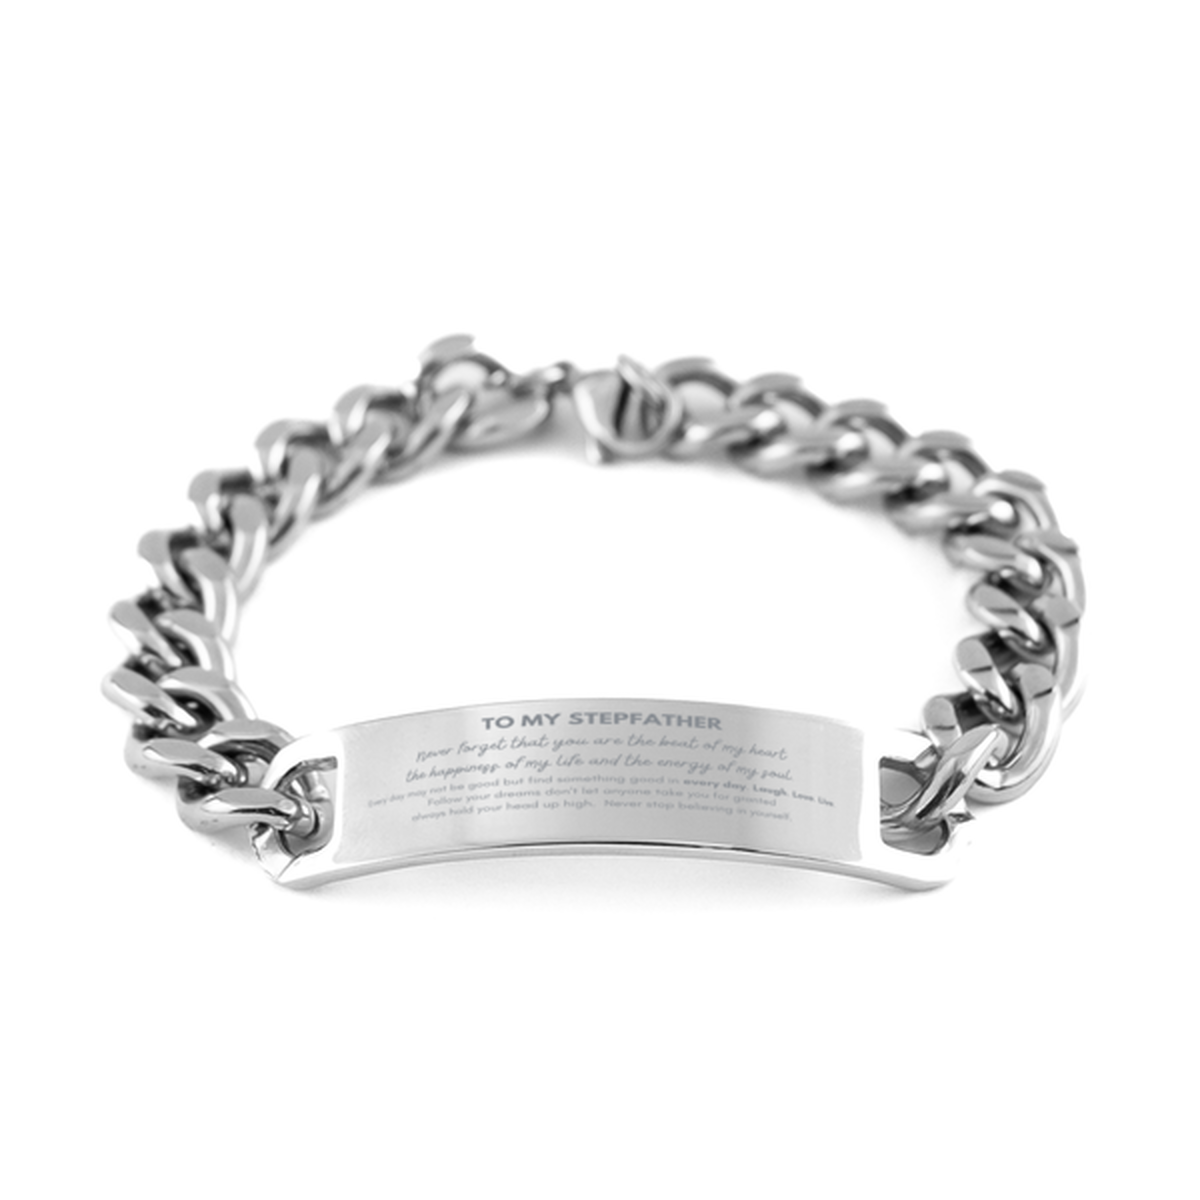 To My Stepfather Bracelet Gifts, Christmas Stepfather Cuban Chain Stainless Steel Bracelet Present, Birthday Unique Motivational For Stepfather, To My Stepfather Never forget that you are the beat of my heart the happiness of my life and the energy of my